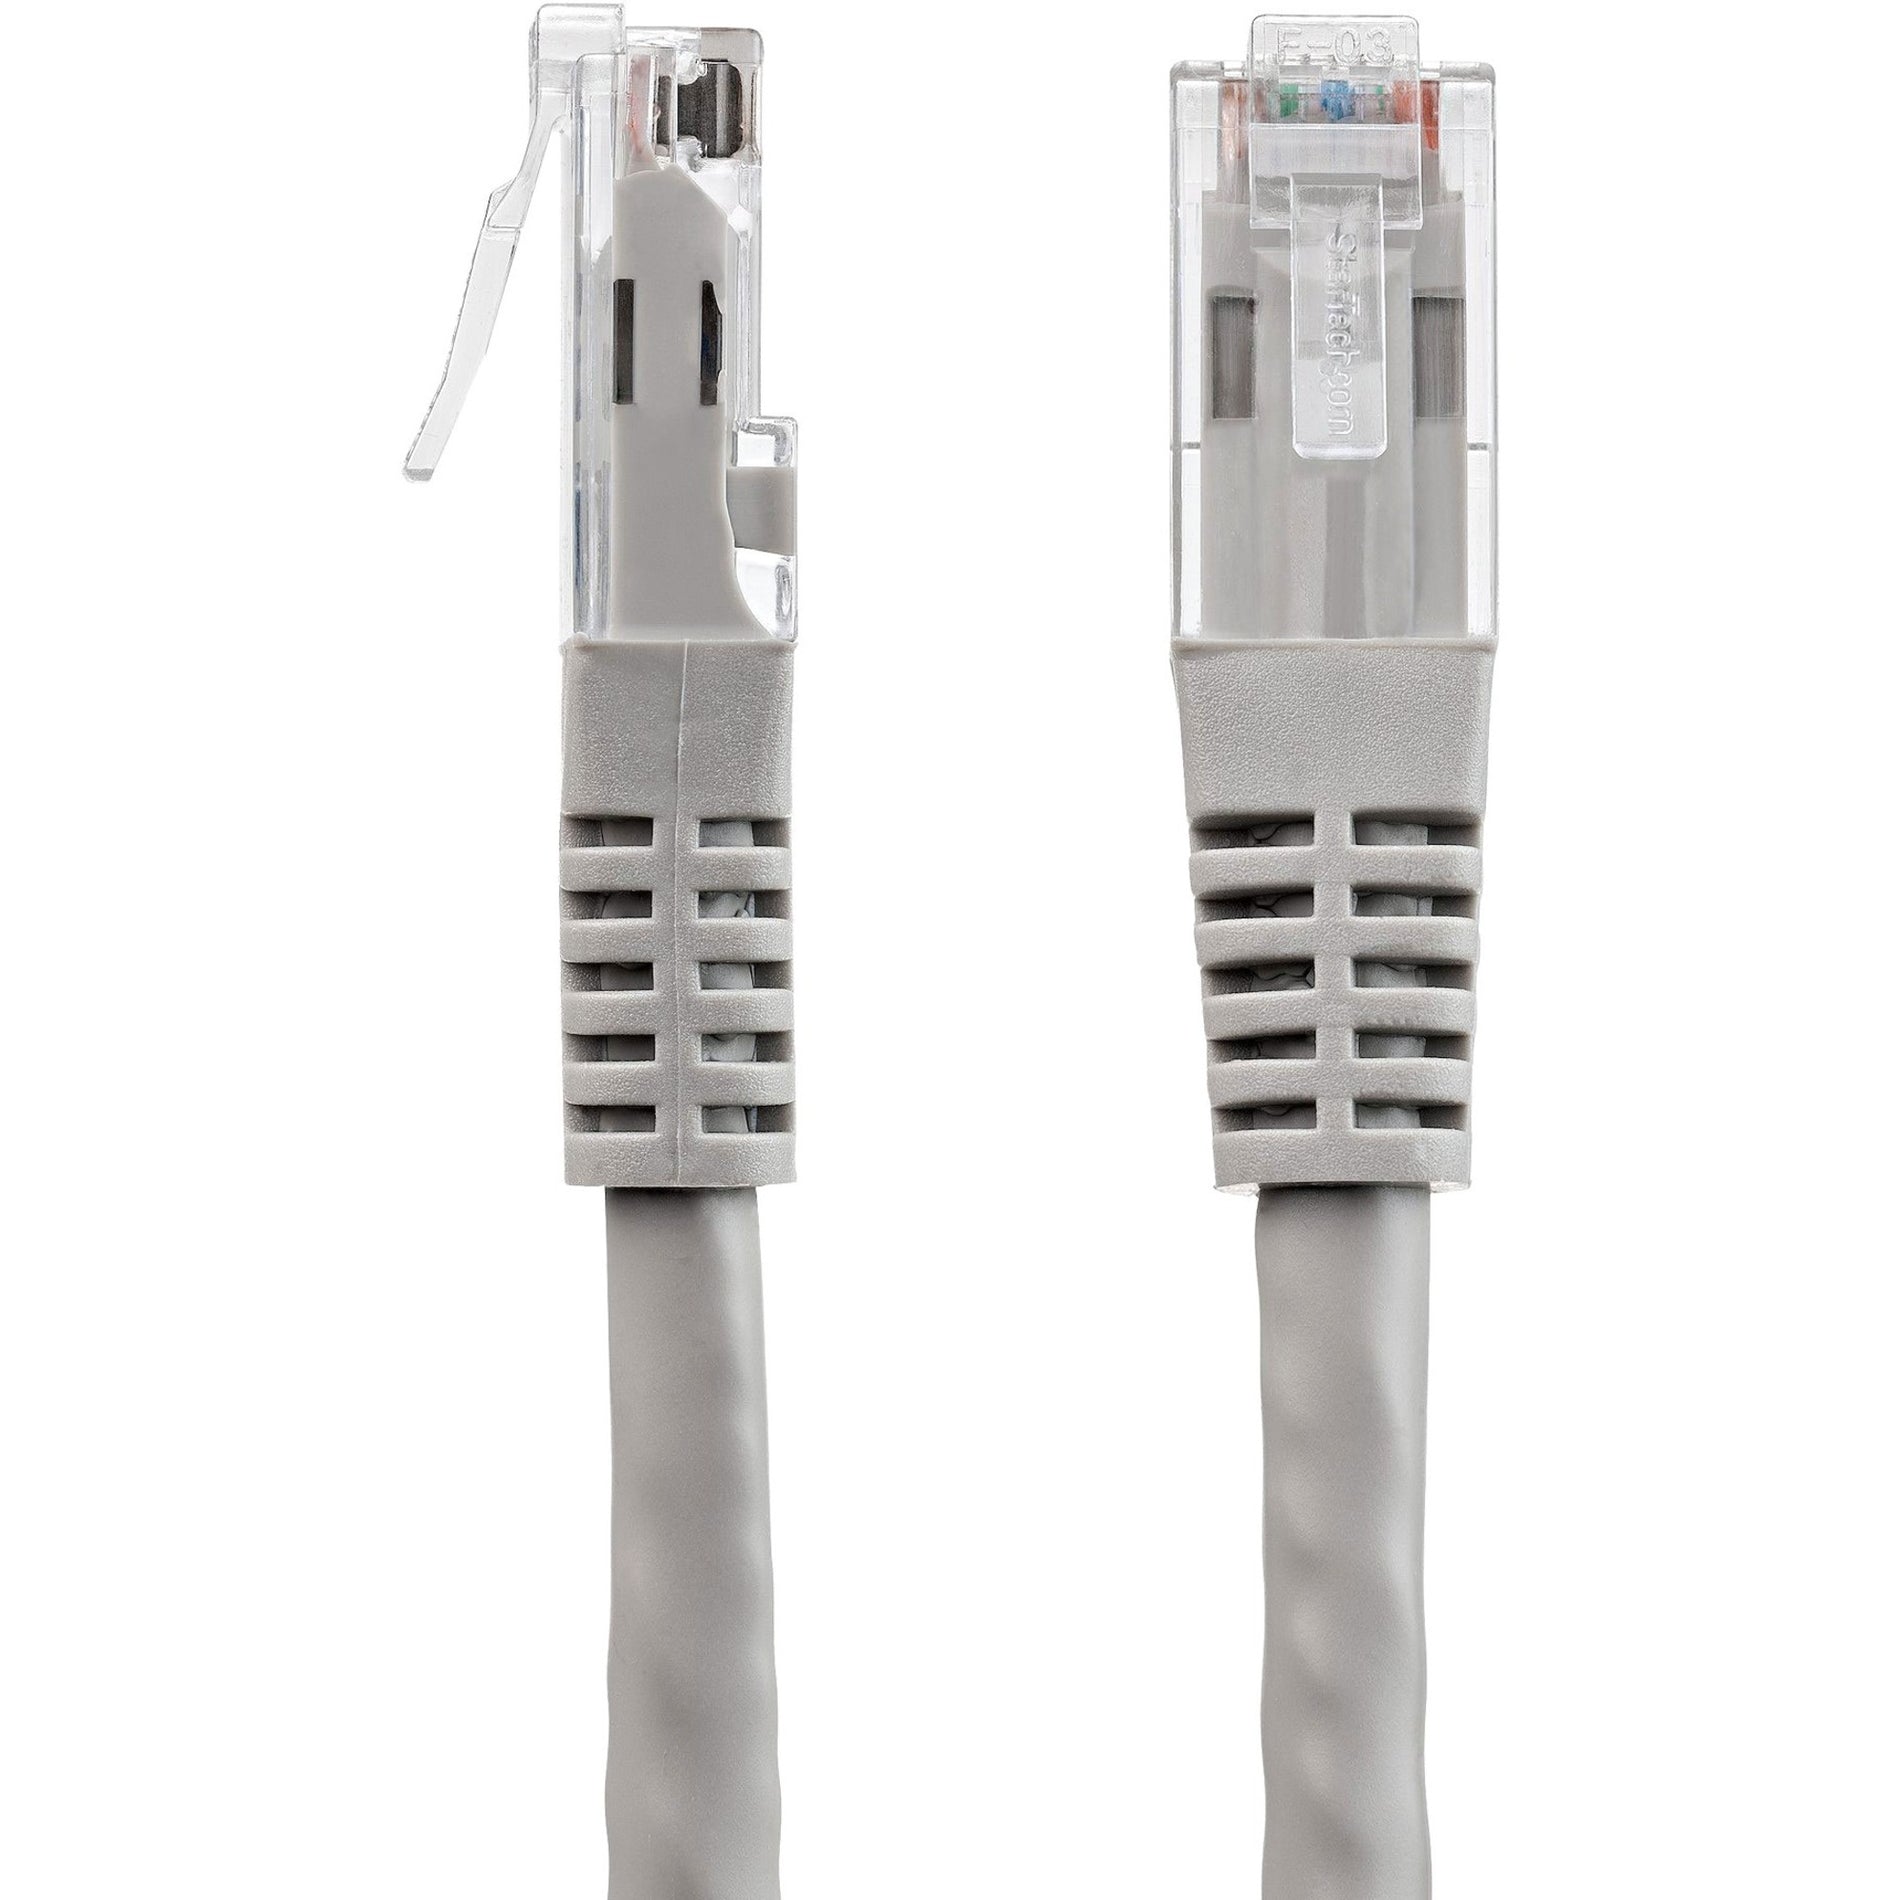 StarTech.com C6PATCH1GR 1ft Green Cat6 UTP Patch Cable, Molded, Strain Relief, 10 Gbit/s